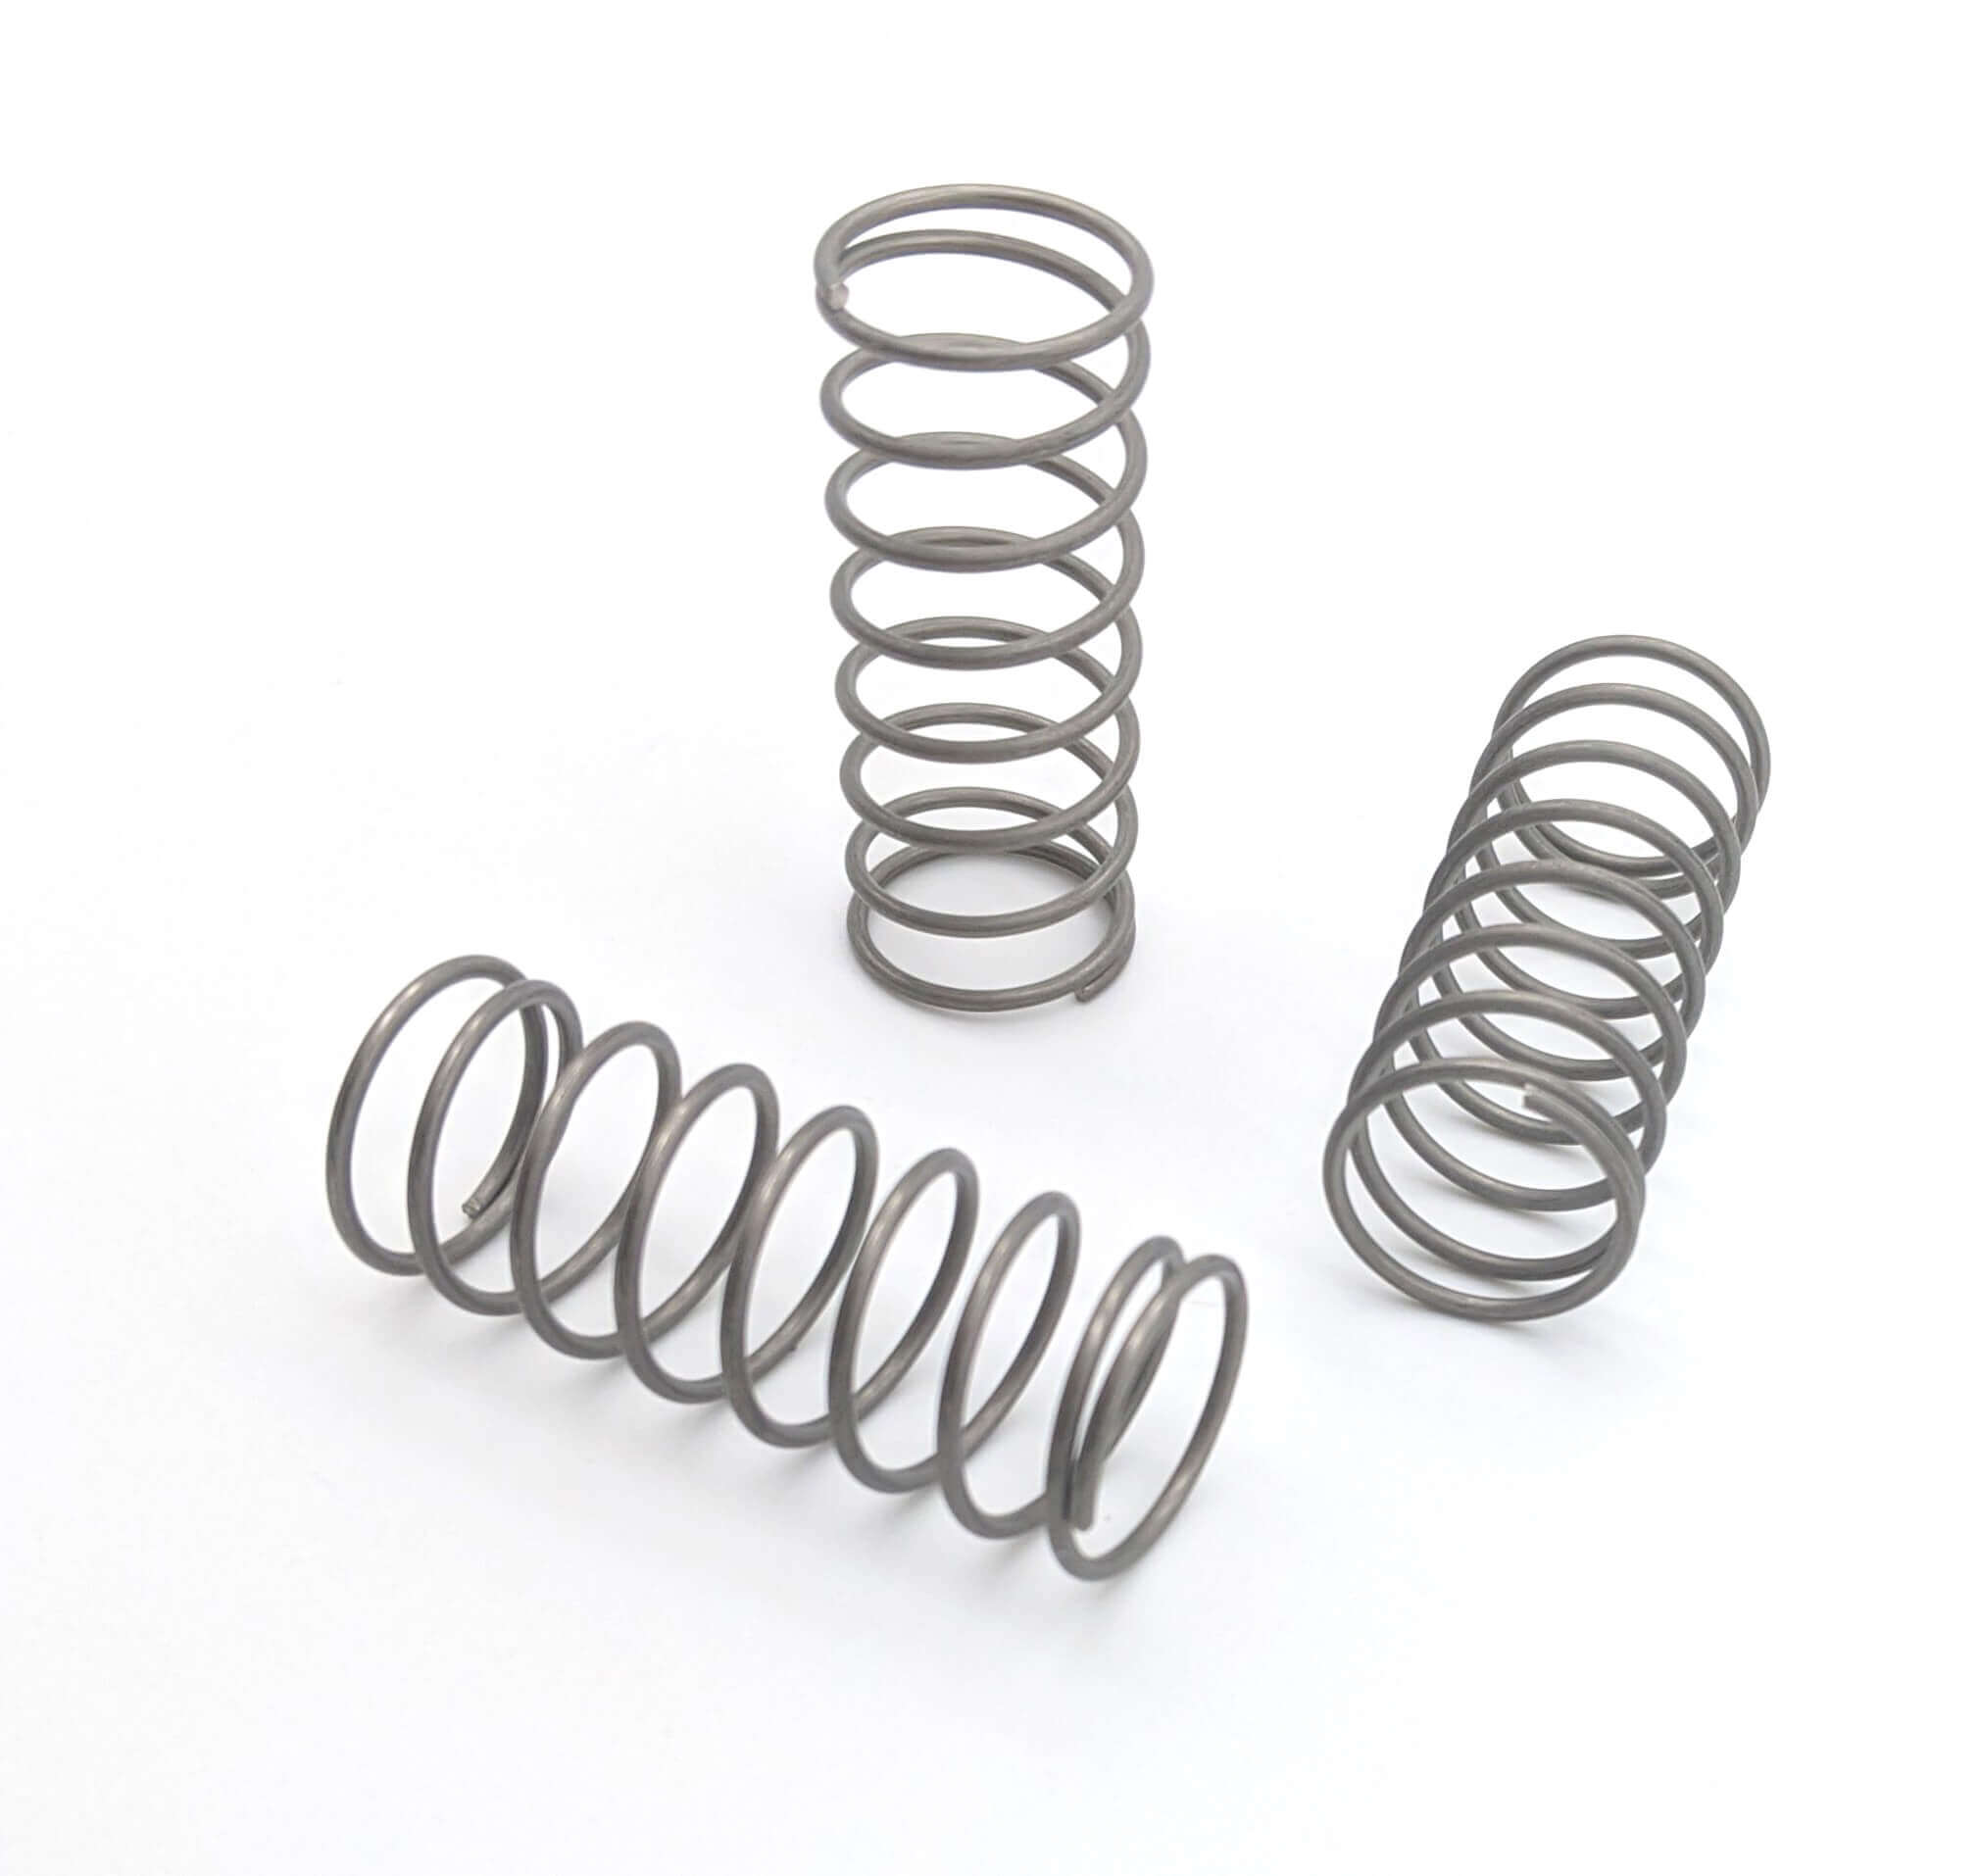 Stainless steel compression spring,